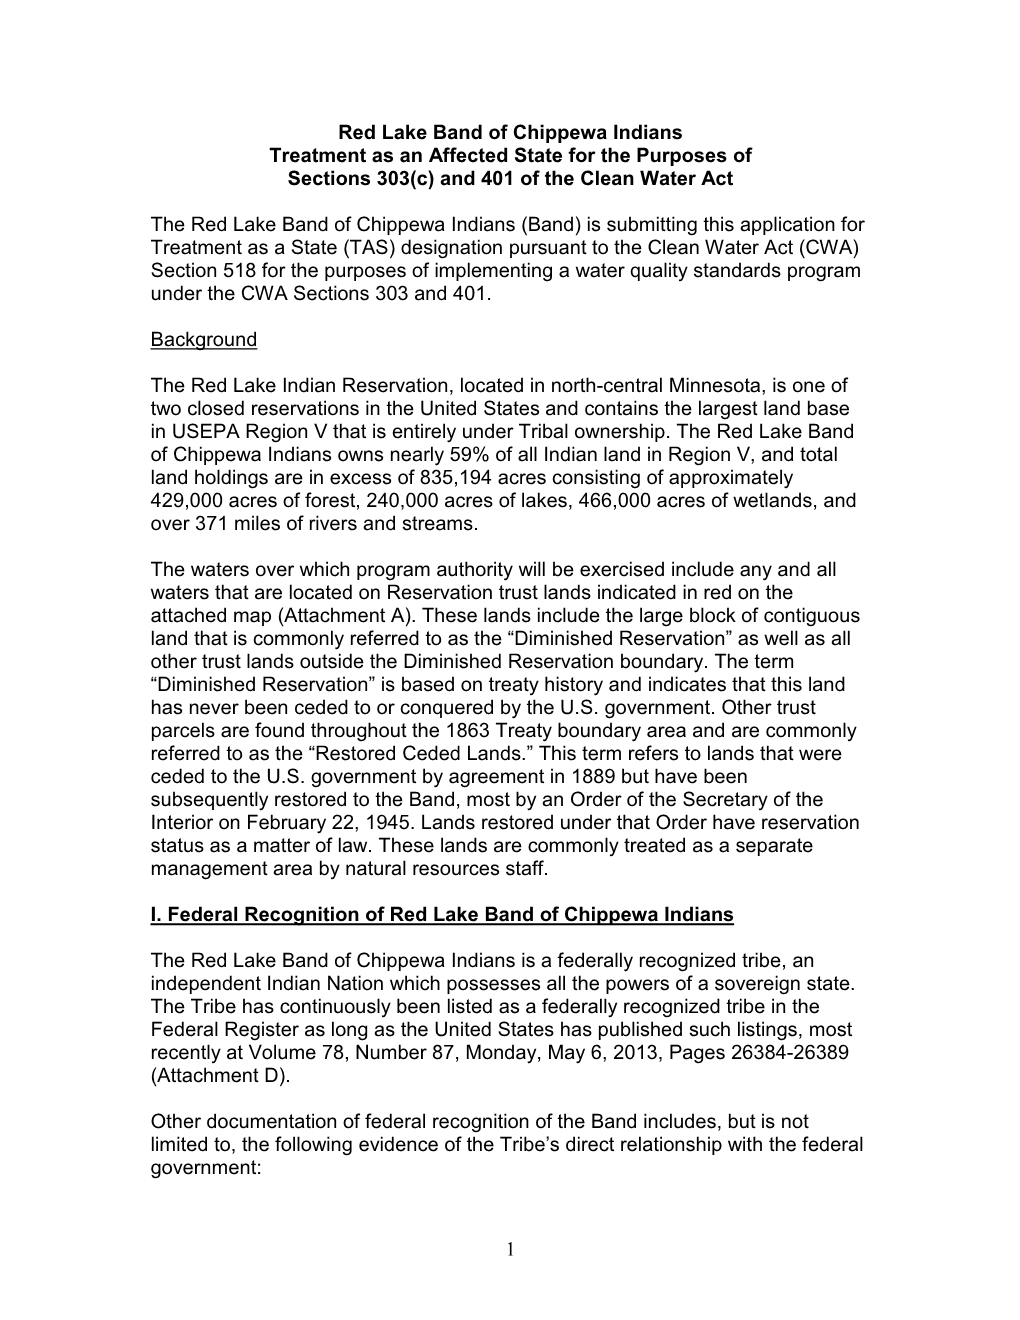 Red Lake Band of Chippewa Indians Treatment As an Affected State for the Purposes of Sections 303(C) and 401 of the Clean Water Act